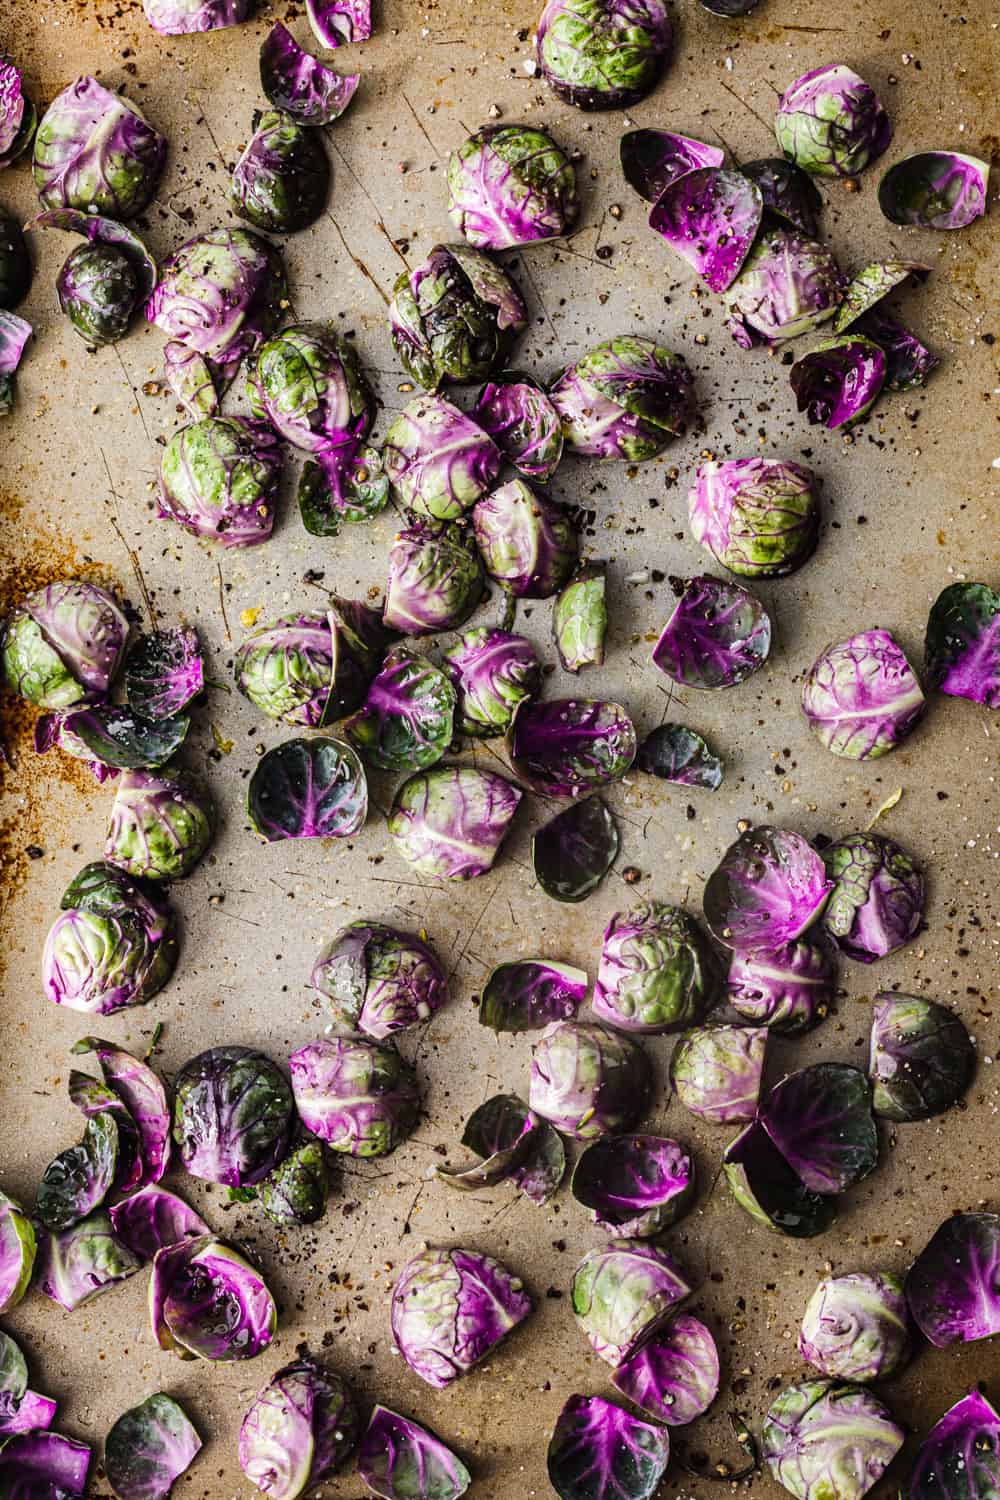 In process shot of raw Purple Brussels sprouts cut in half, tossed with olive oil, salt and pepper; overhead and pre-oven shot.